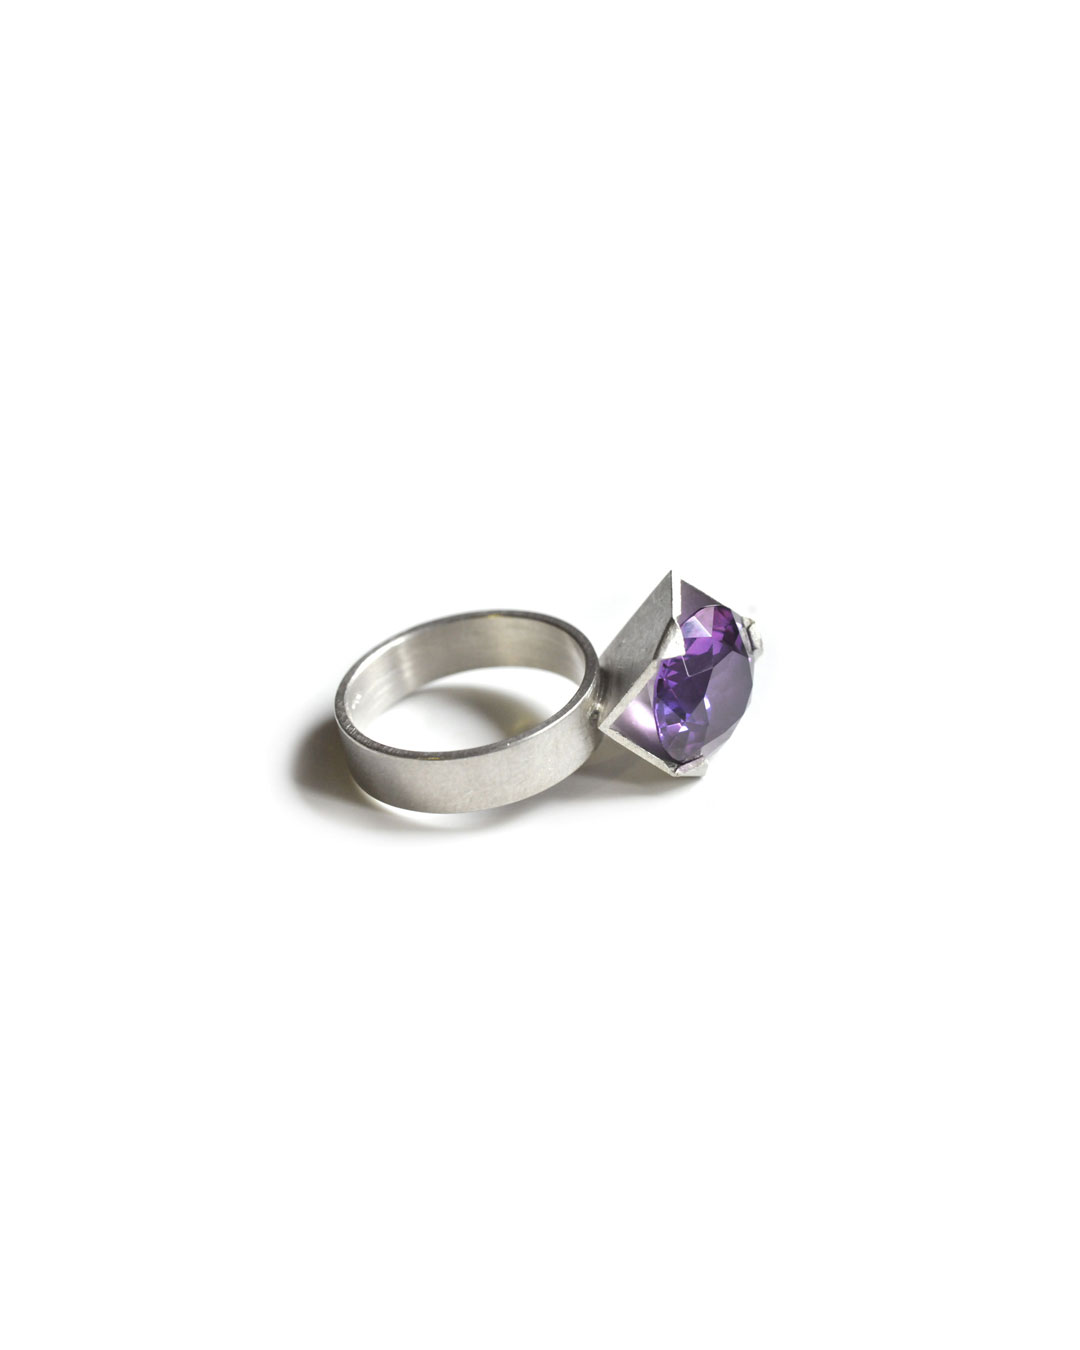 Herman Hermsen, 1/2 Cube Ring, 1998, ring; silver, synthetic stone, 32 x 14 x 13 mm, €305